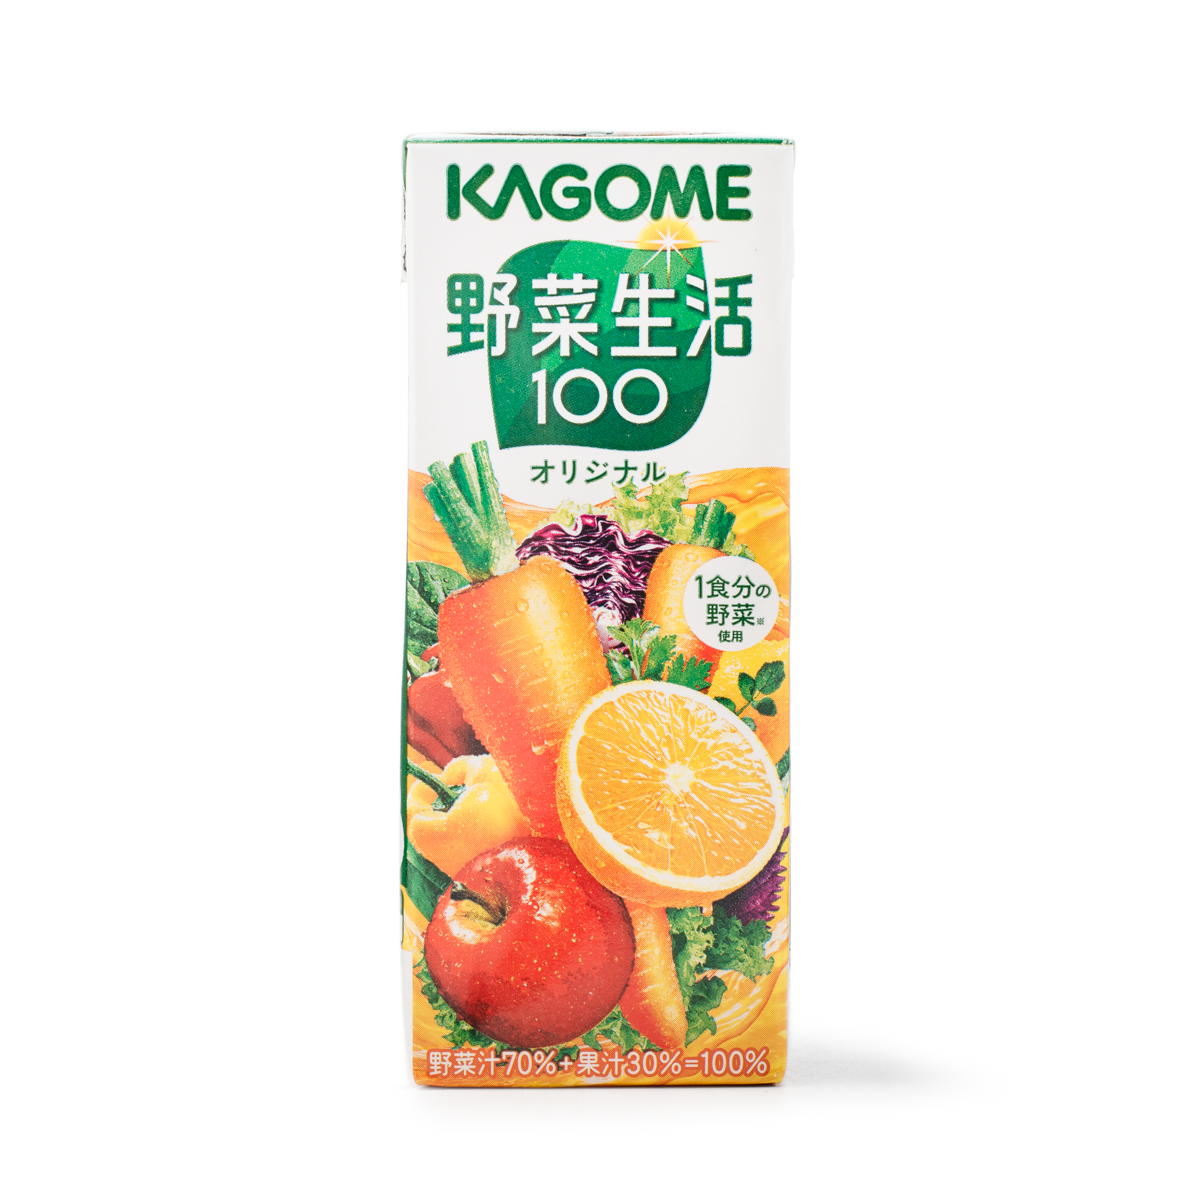 kagome-mixed-fruits-and-vegetables-juice